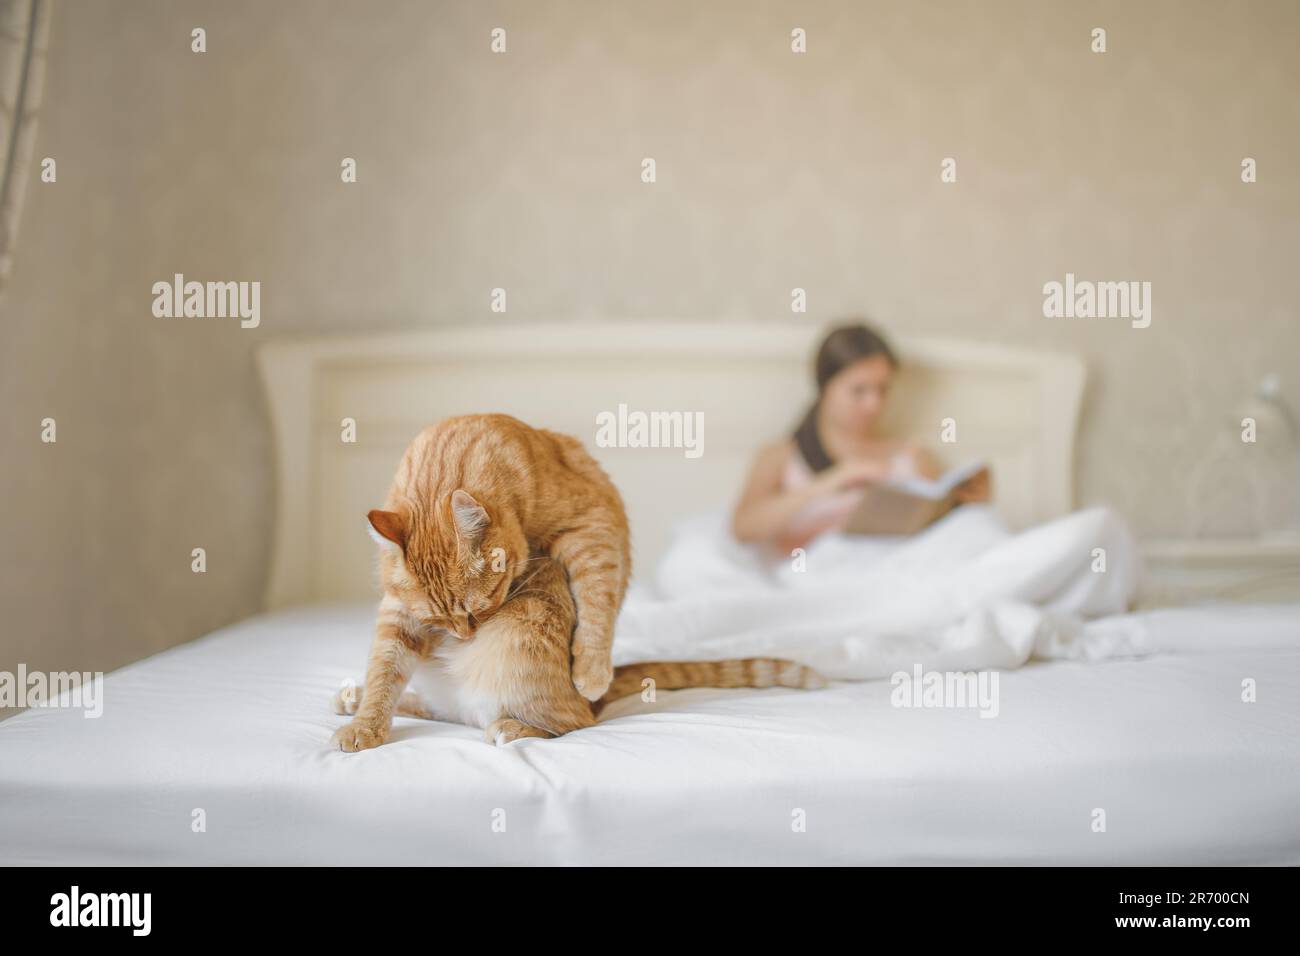 Ginger cat grooming itself on a pristine white bed alongside a woman Stock Photo